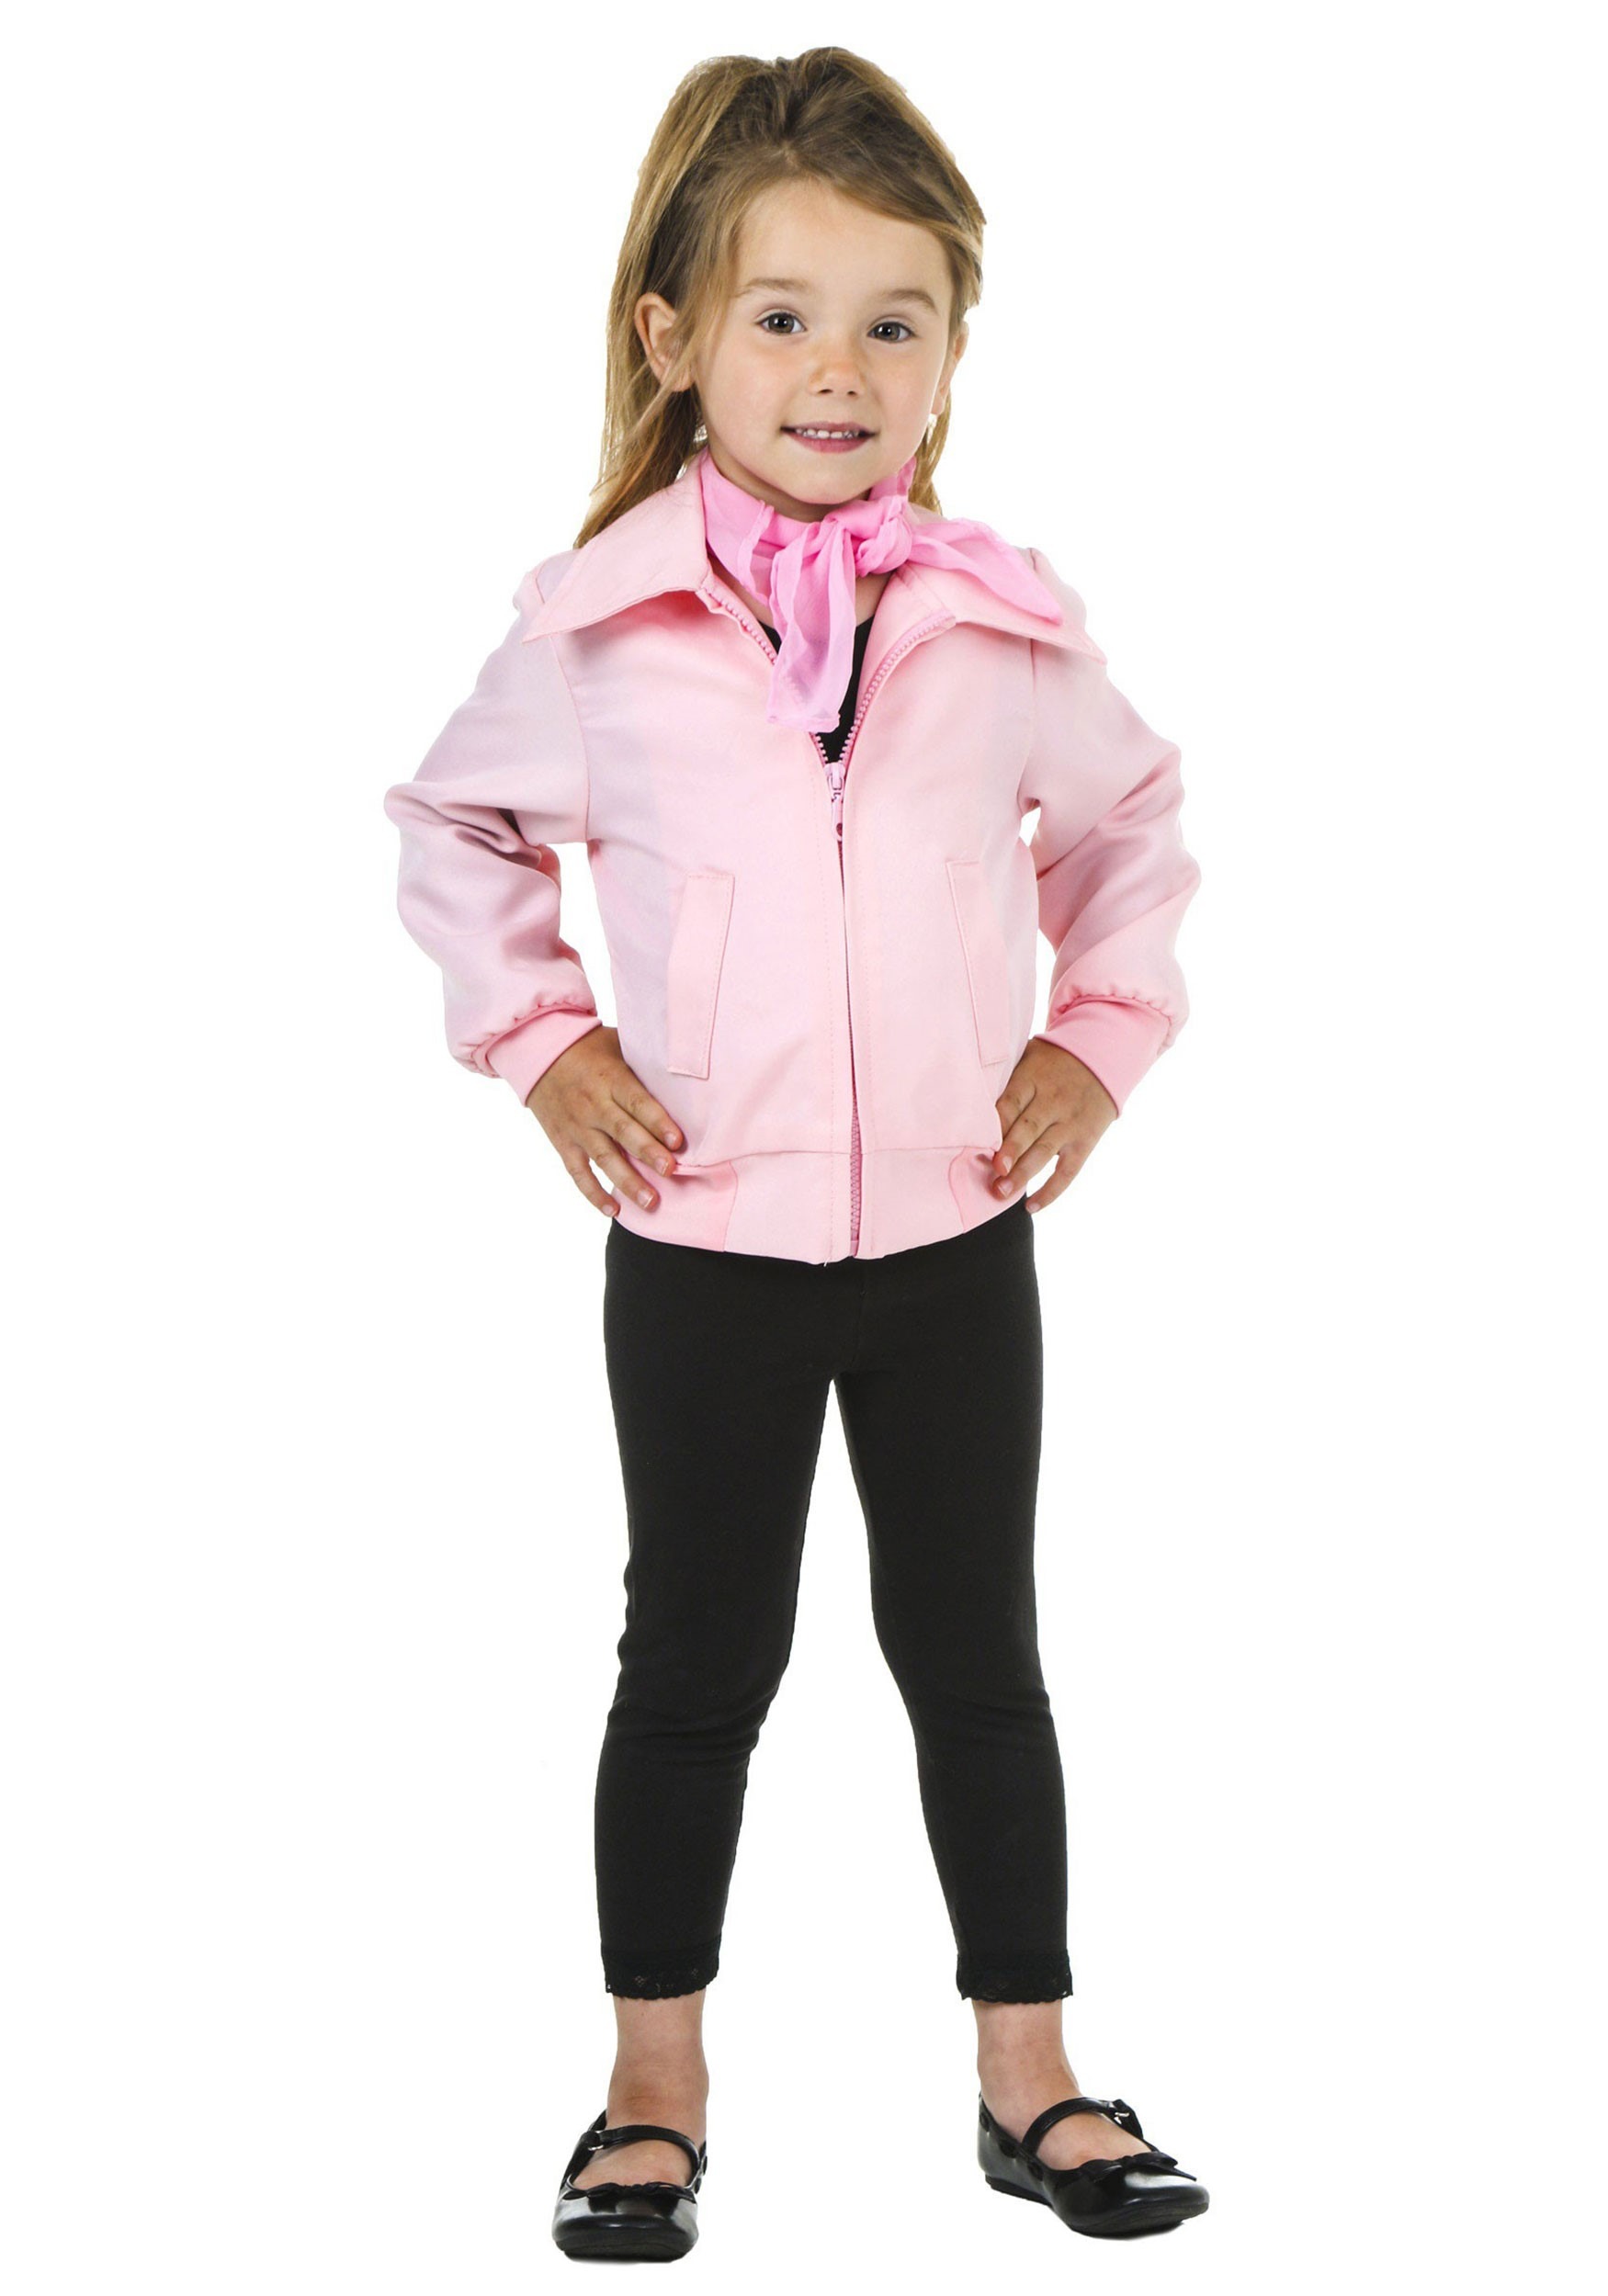 Deluxe Pink Ladies Jacket Costume for Toddlers